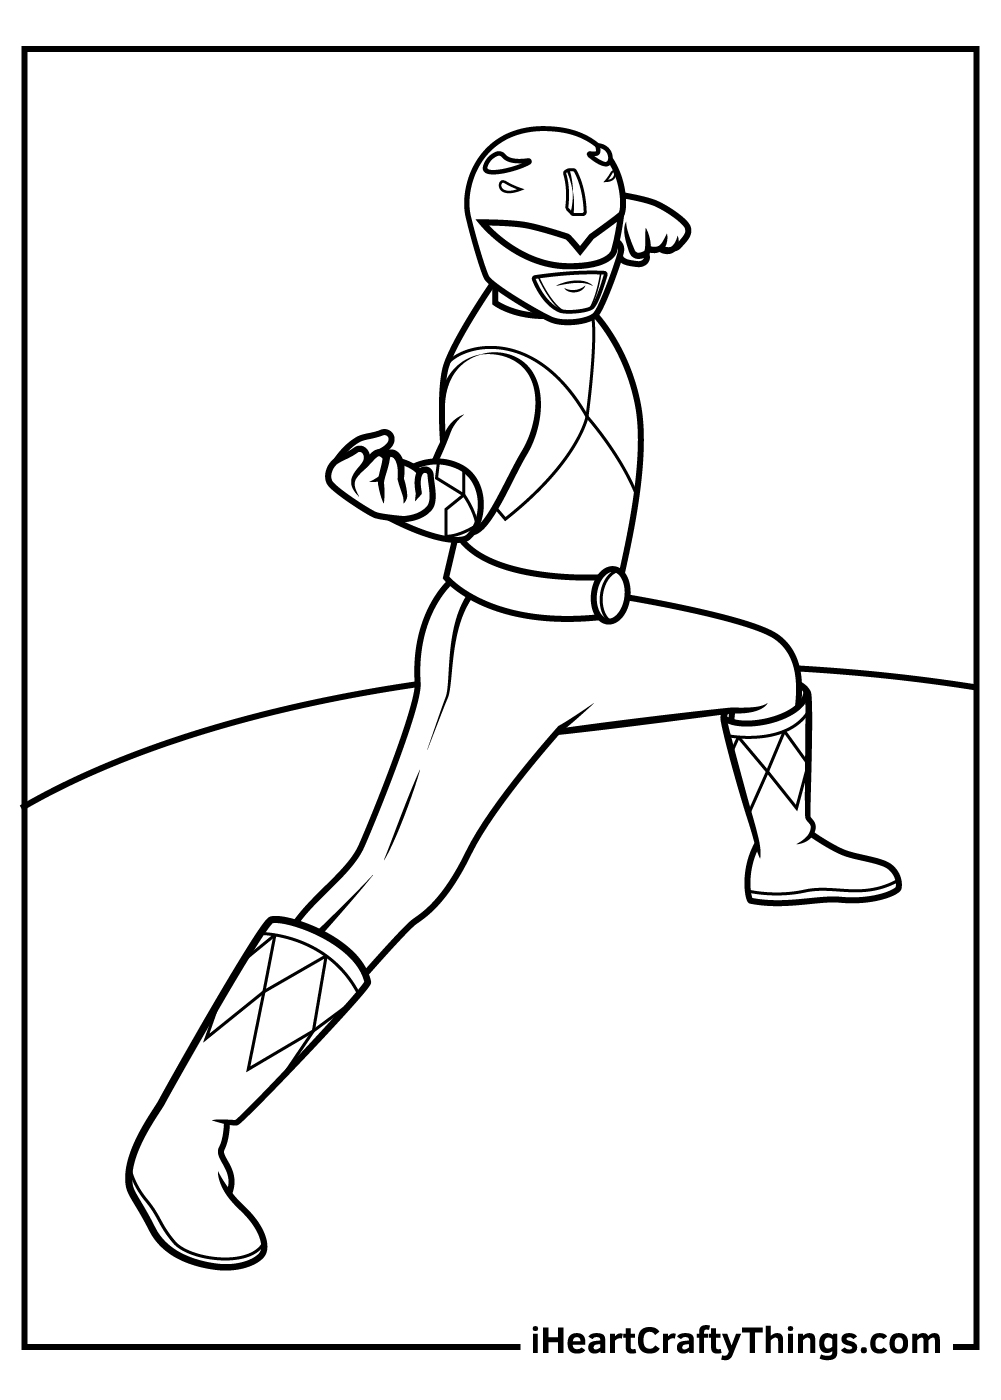 Printable Power Rangers Coloring Pages (Updated 2022)